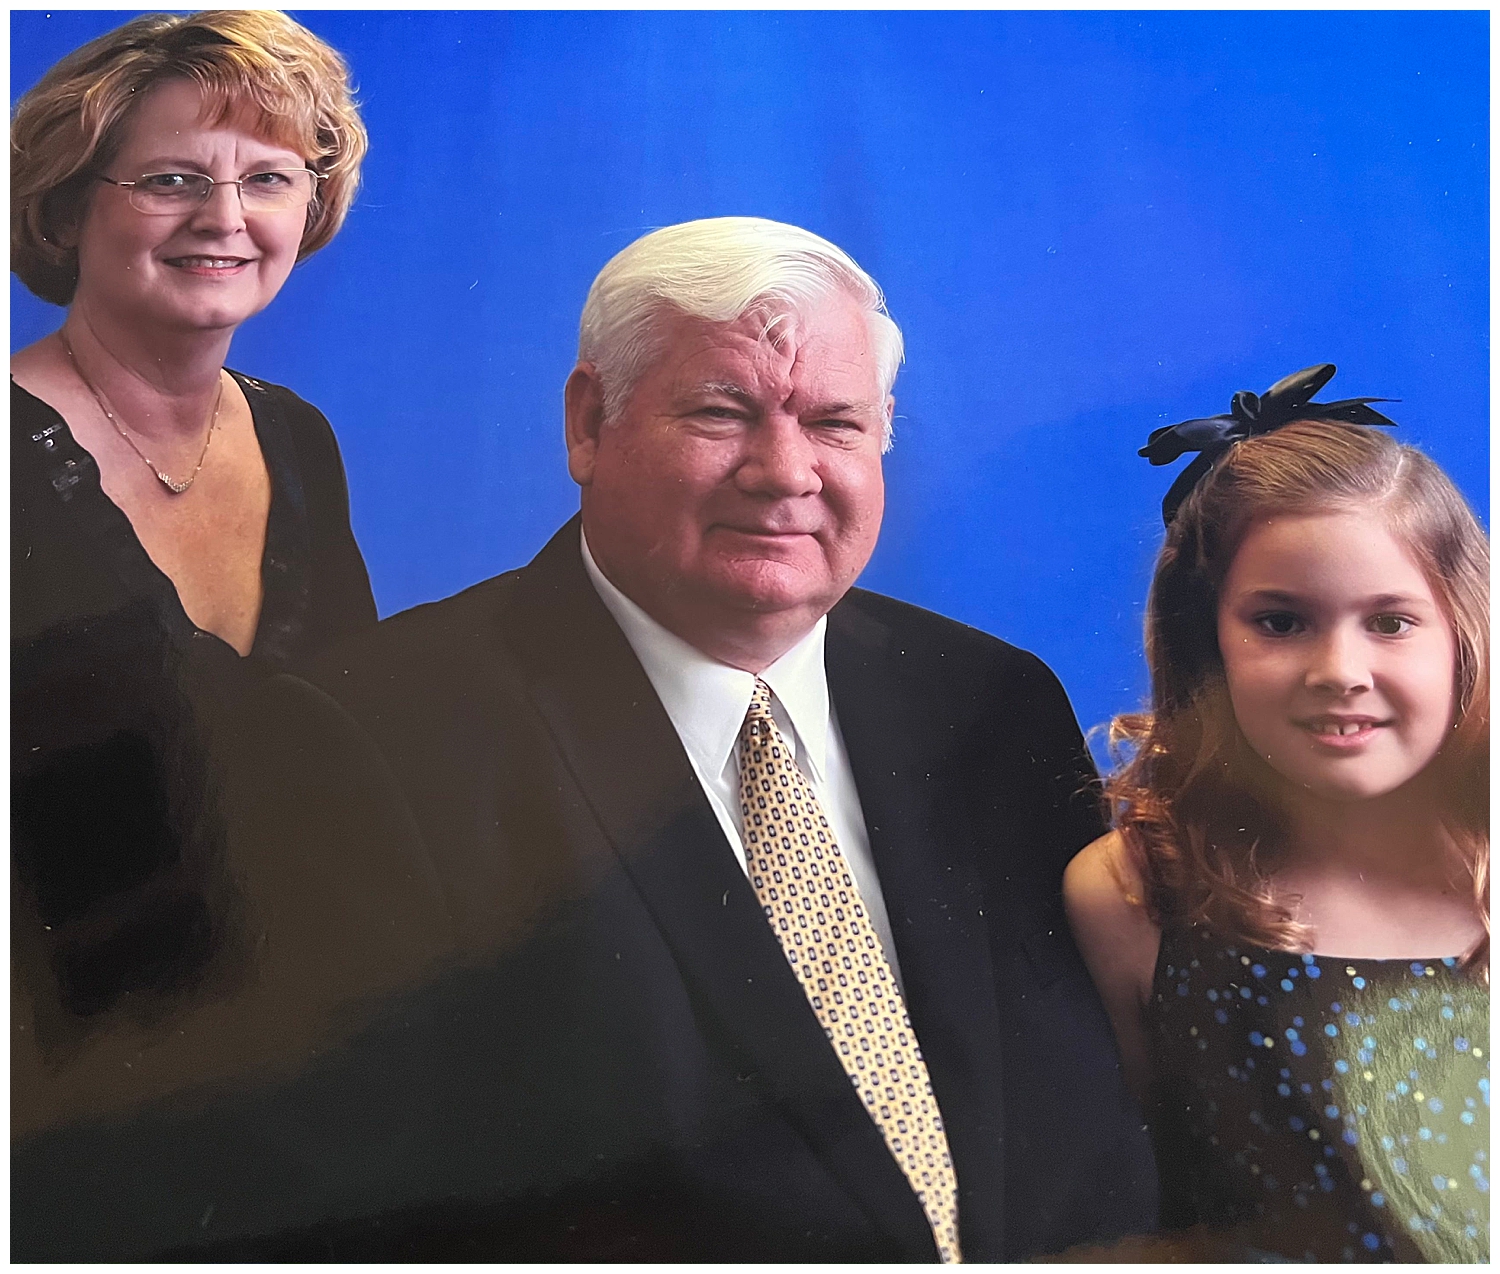 A family smiles at the camera in front of a royal blue wall in Mississippi.